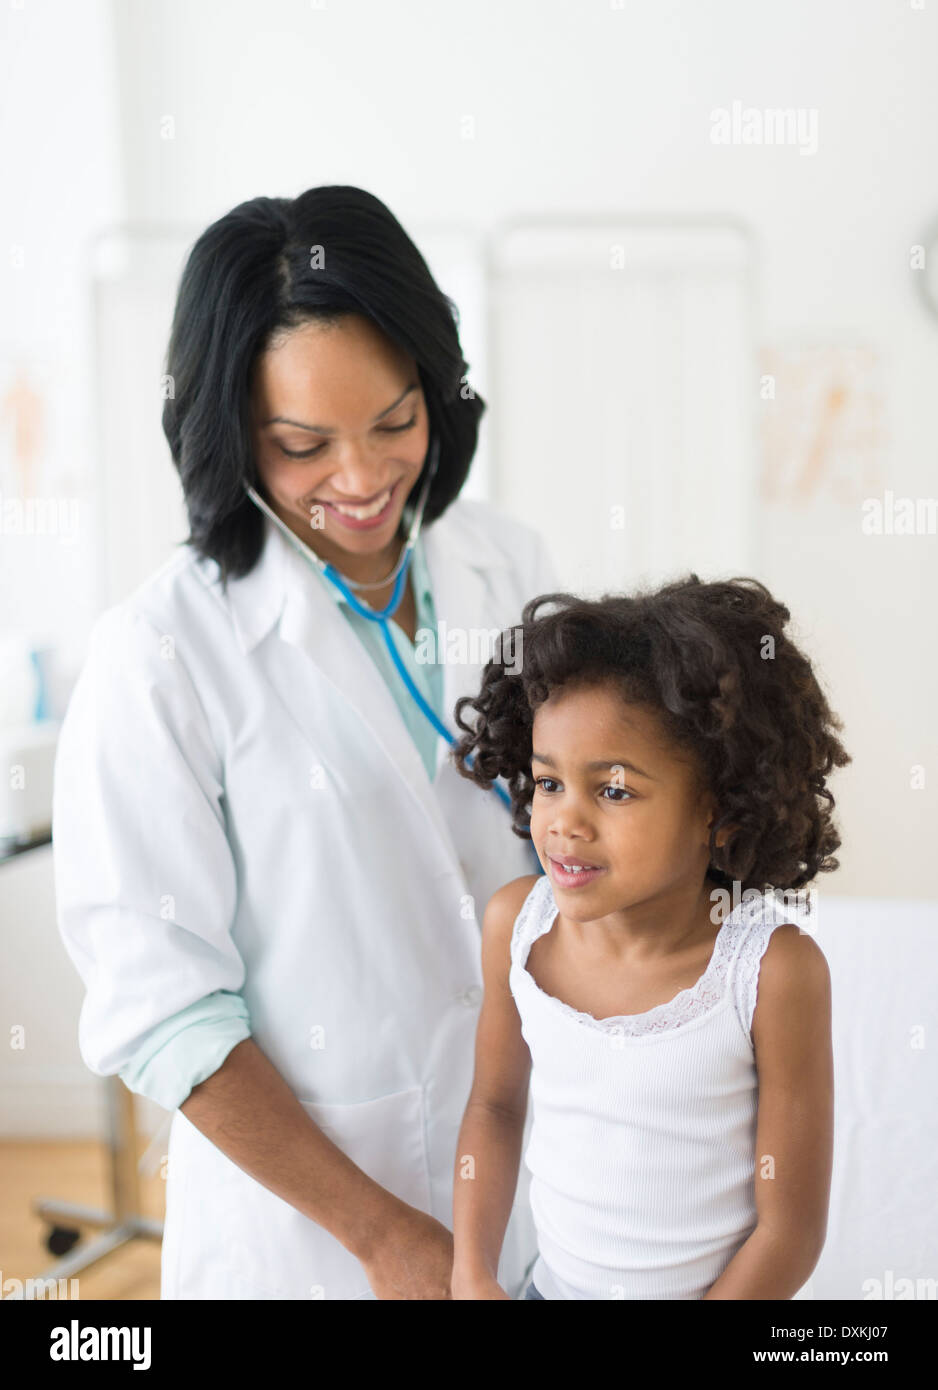 African American girl receiving checkup from doctor Stock Photo